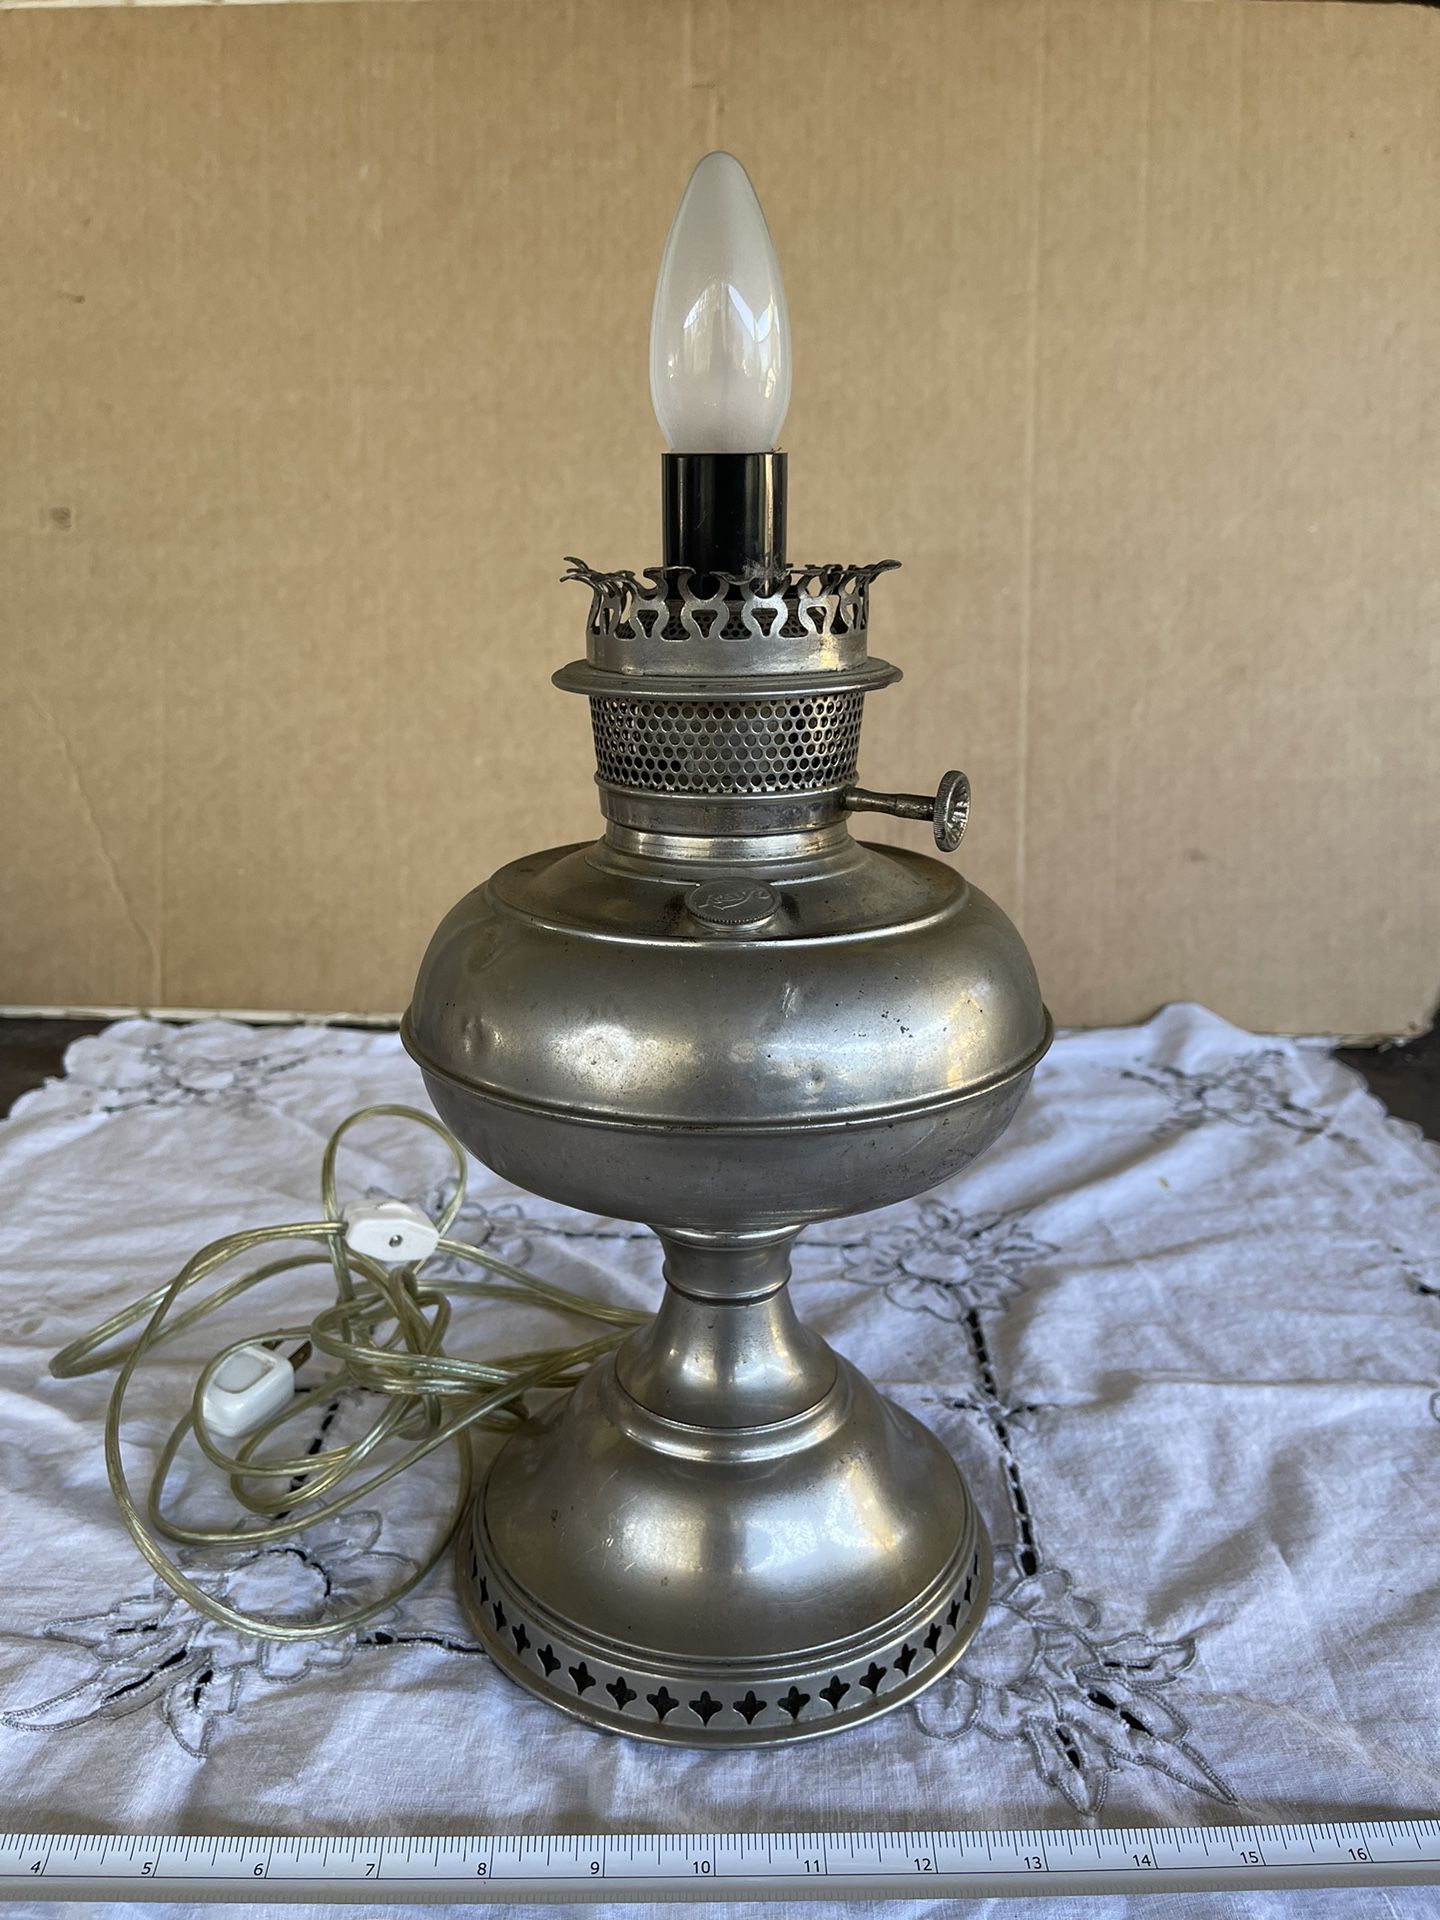 Antique Nickel Plated Kerosene Oil Lamp Converted to Electric